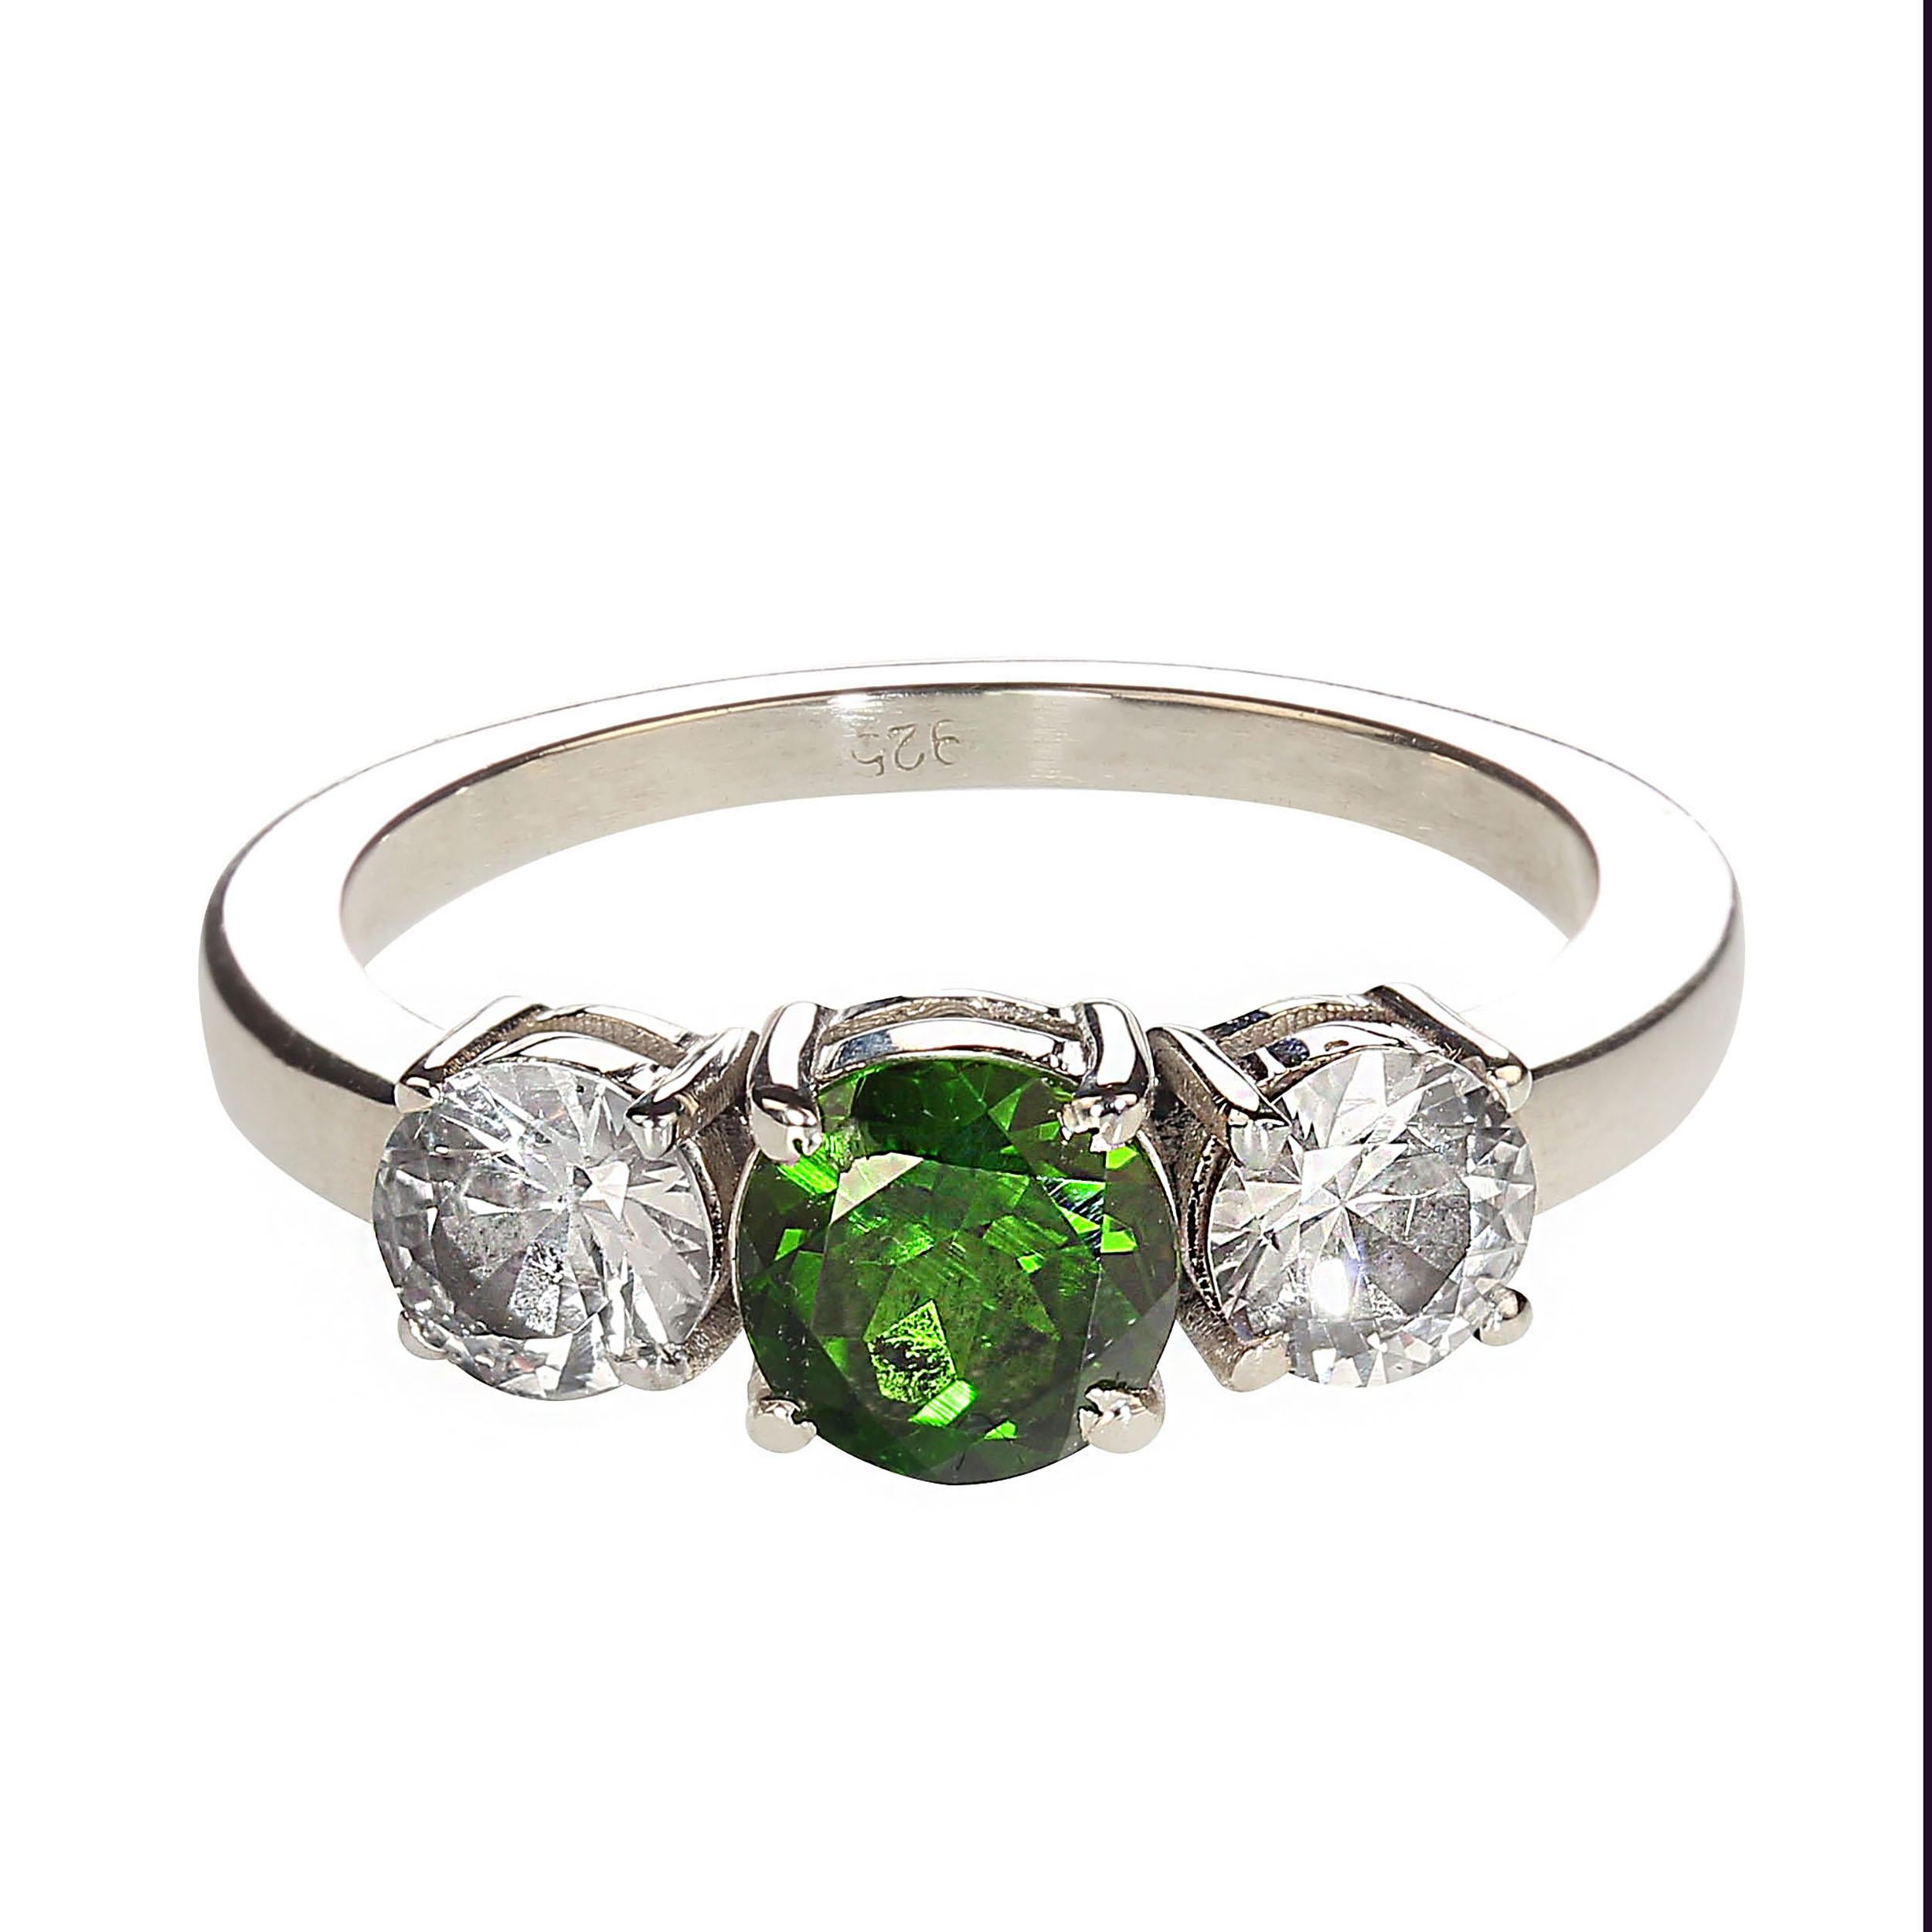 Sparkling rare green Demantoid Garnet accented by two white Sapphires, set in a Sterling Silver Classically designed ring.  The garnet weighs 1.15cts.  The white white sapphires total weight 1.06cts. No changes by seller.  This is a sizable 8.25.